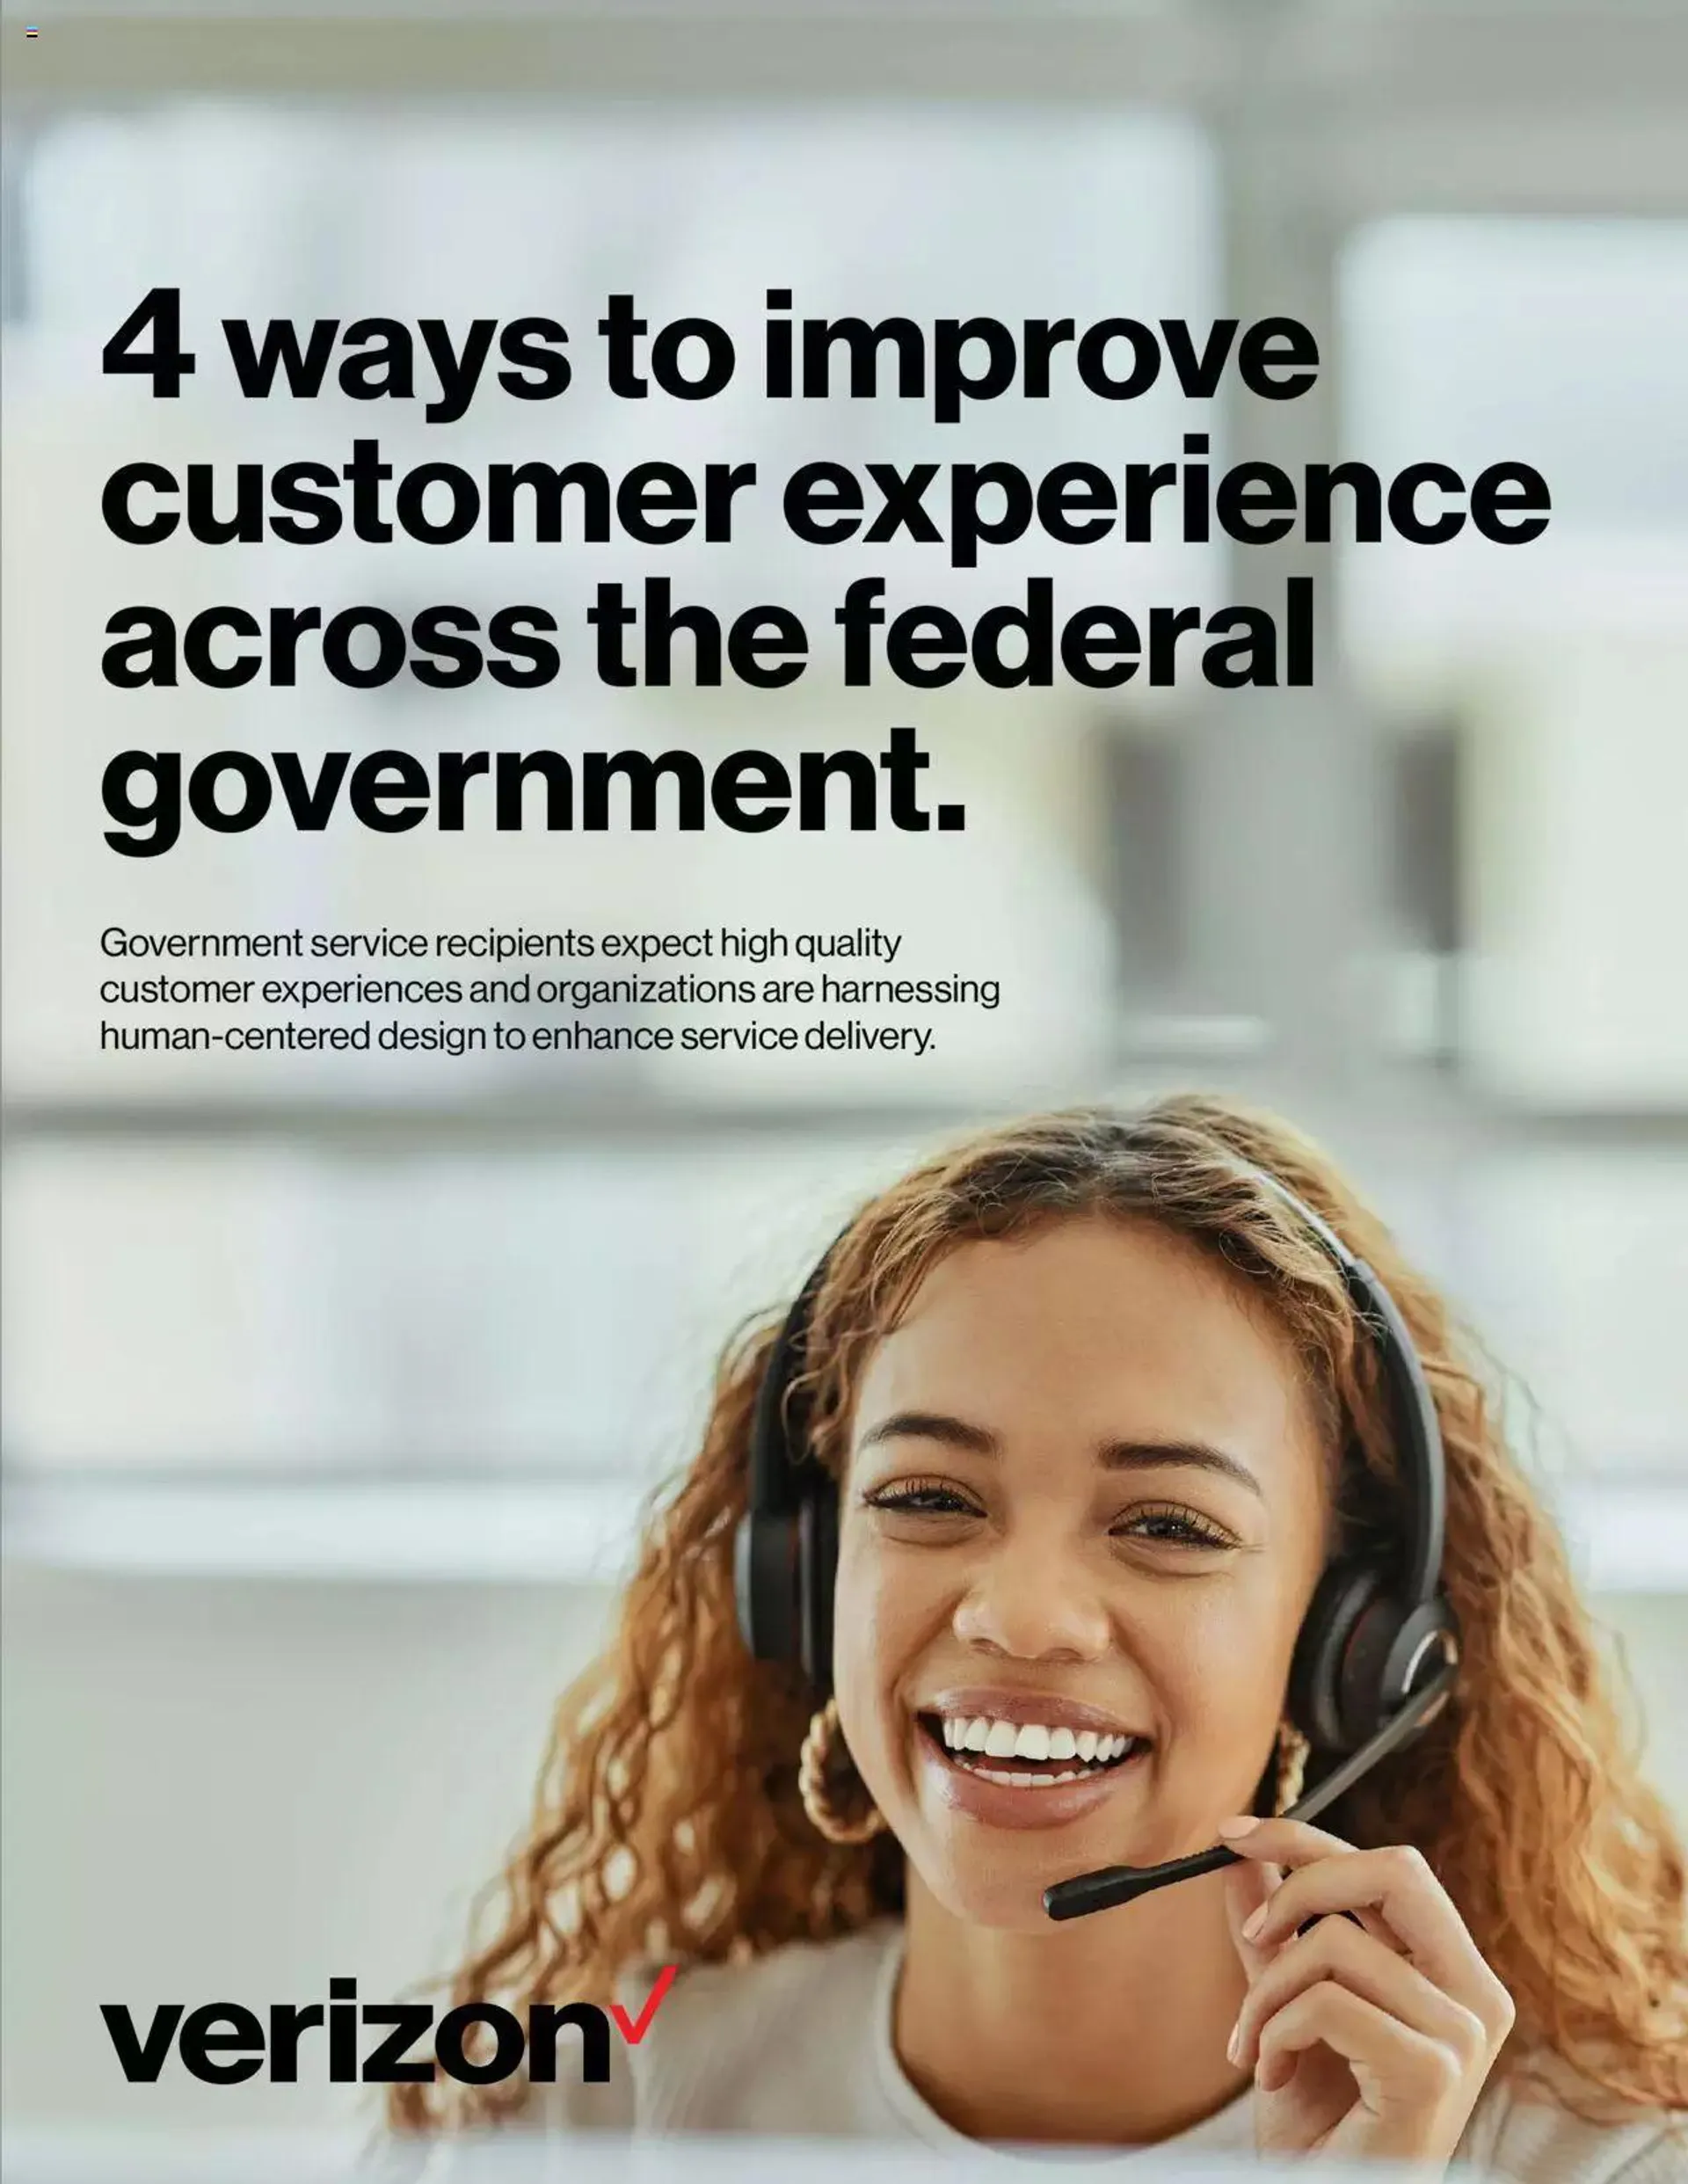 Verizon - 4 ways to improve customer experience across the federal government - 0